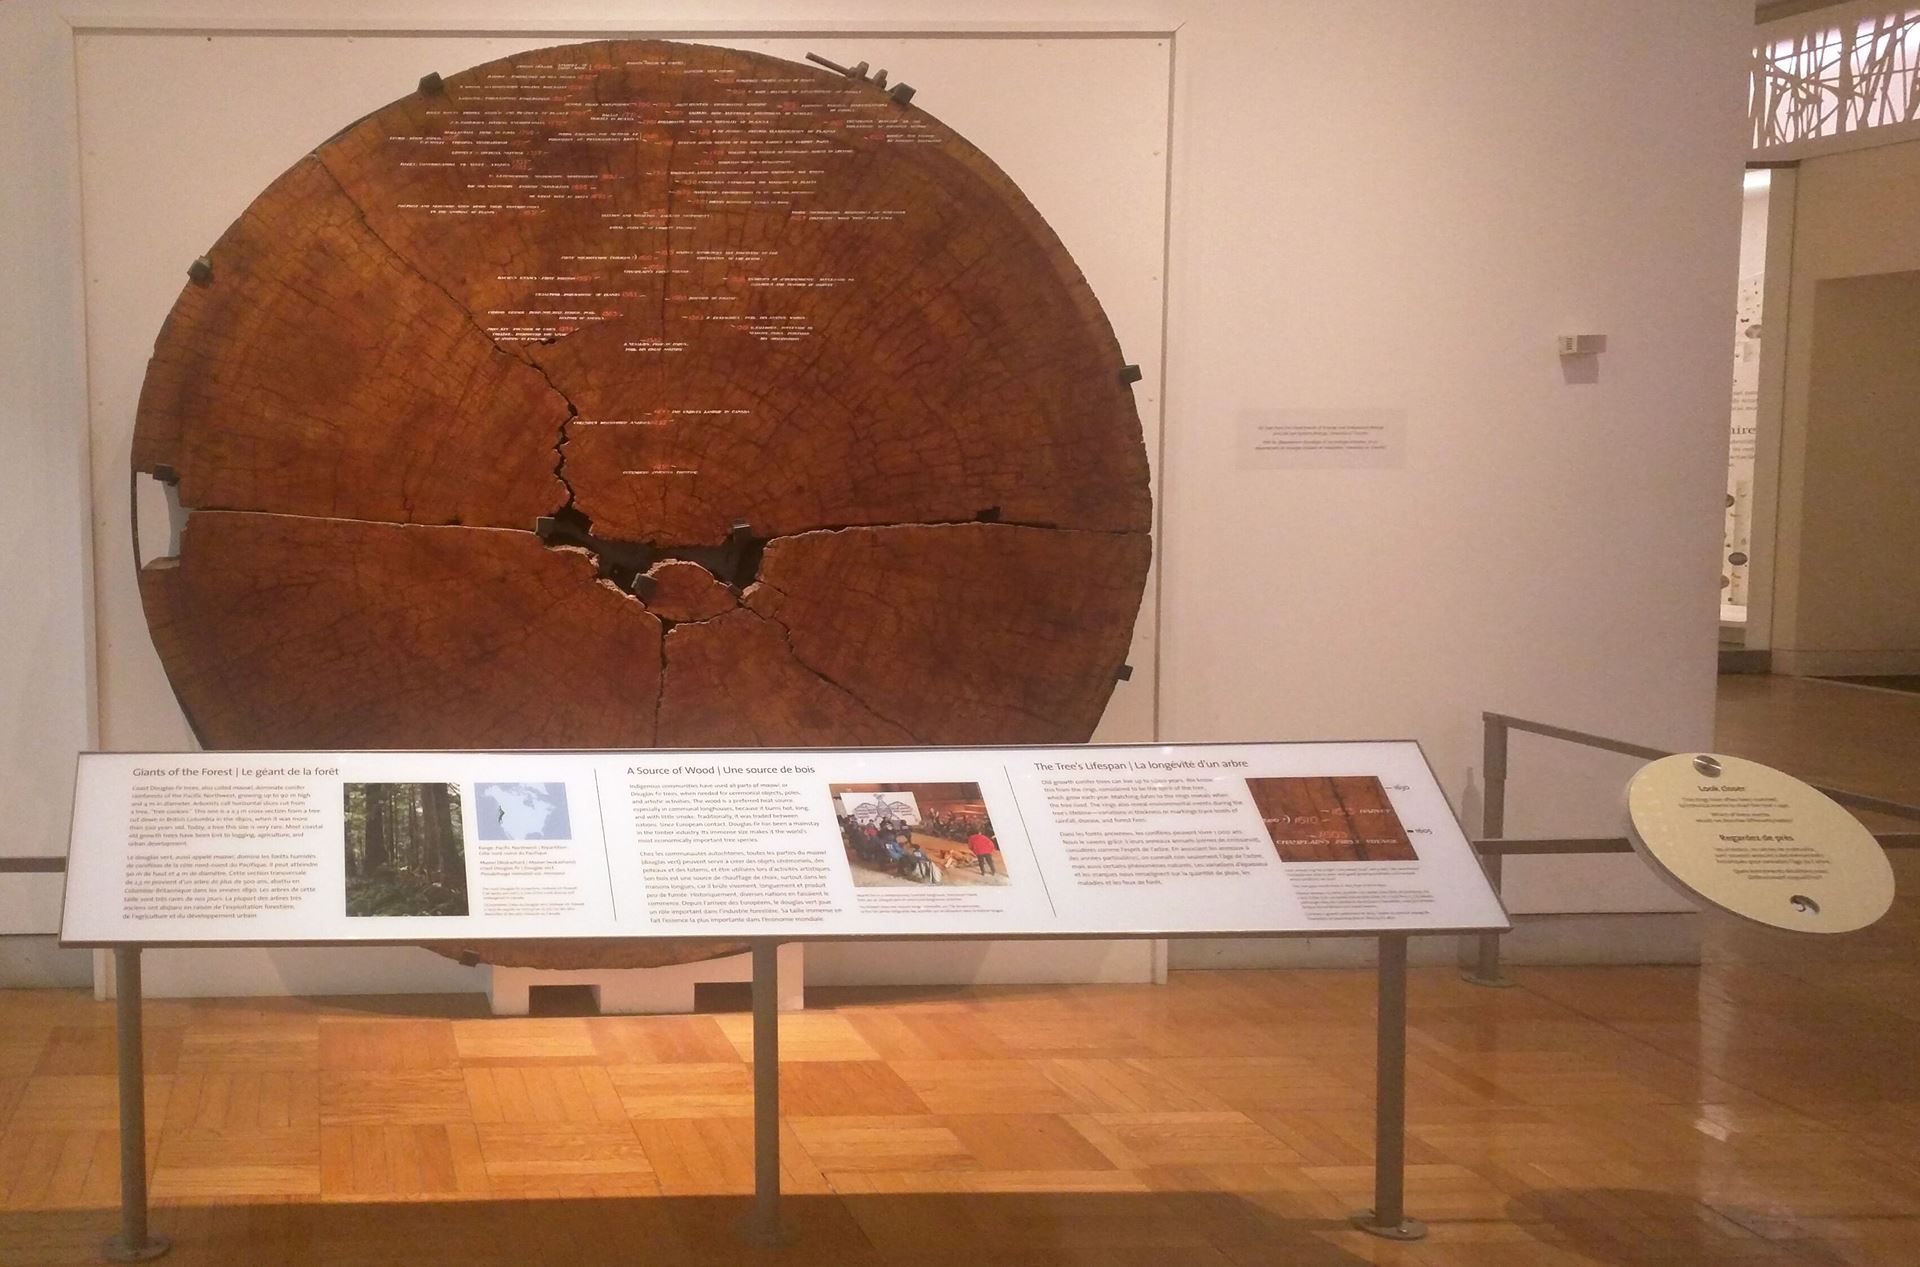 Tree cookie on display at Royal Ontario Museum - an IC blog